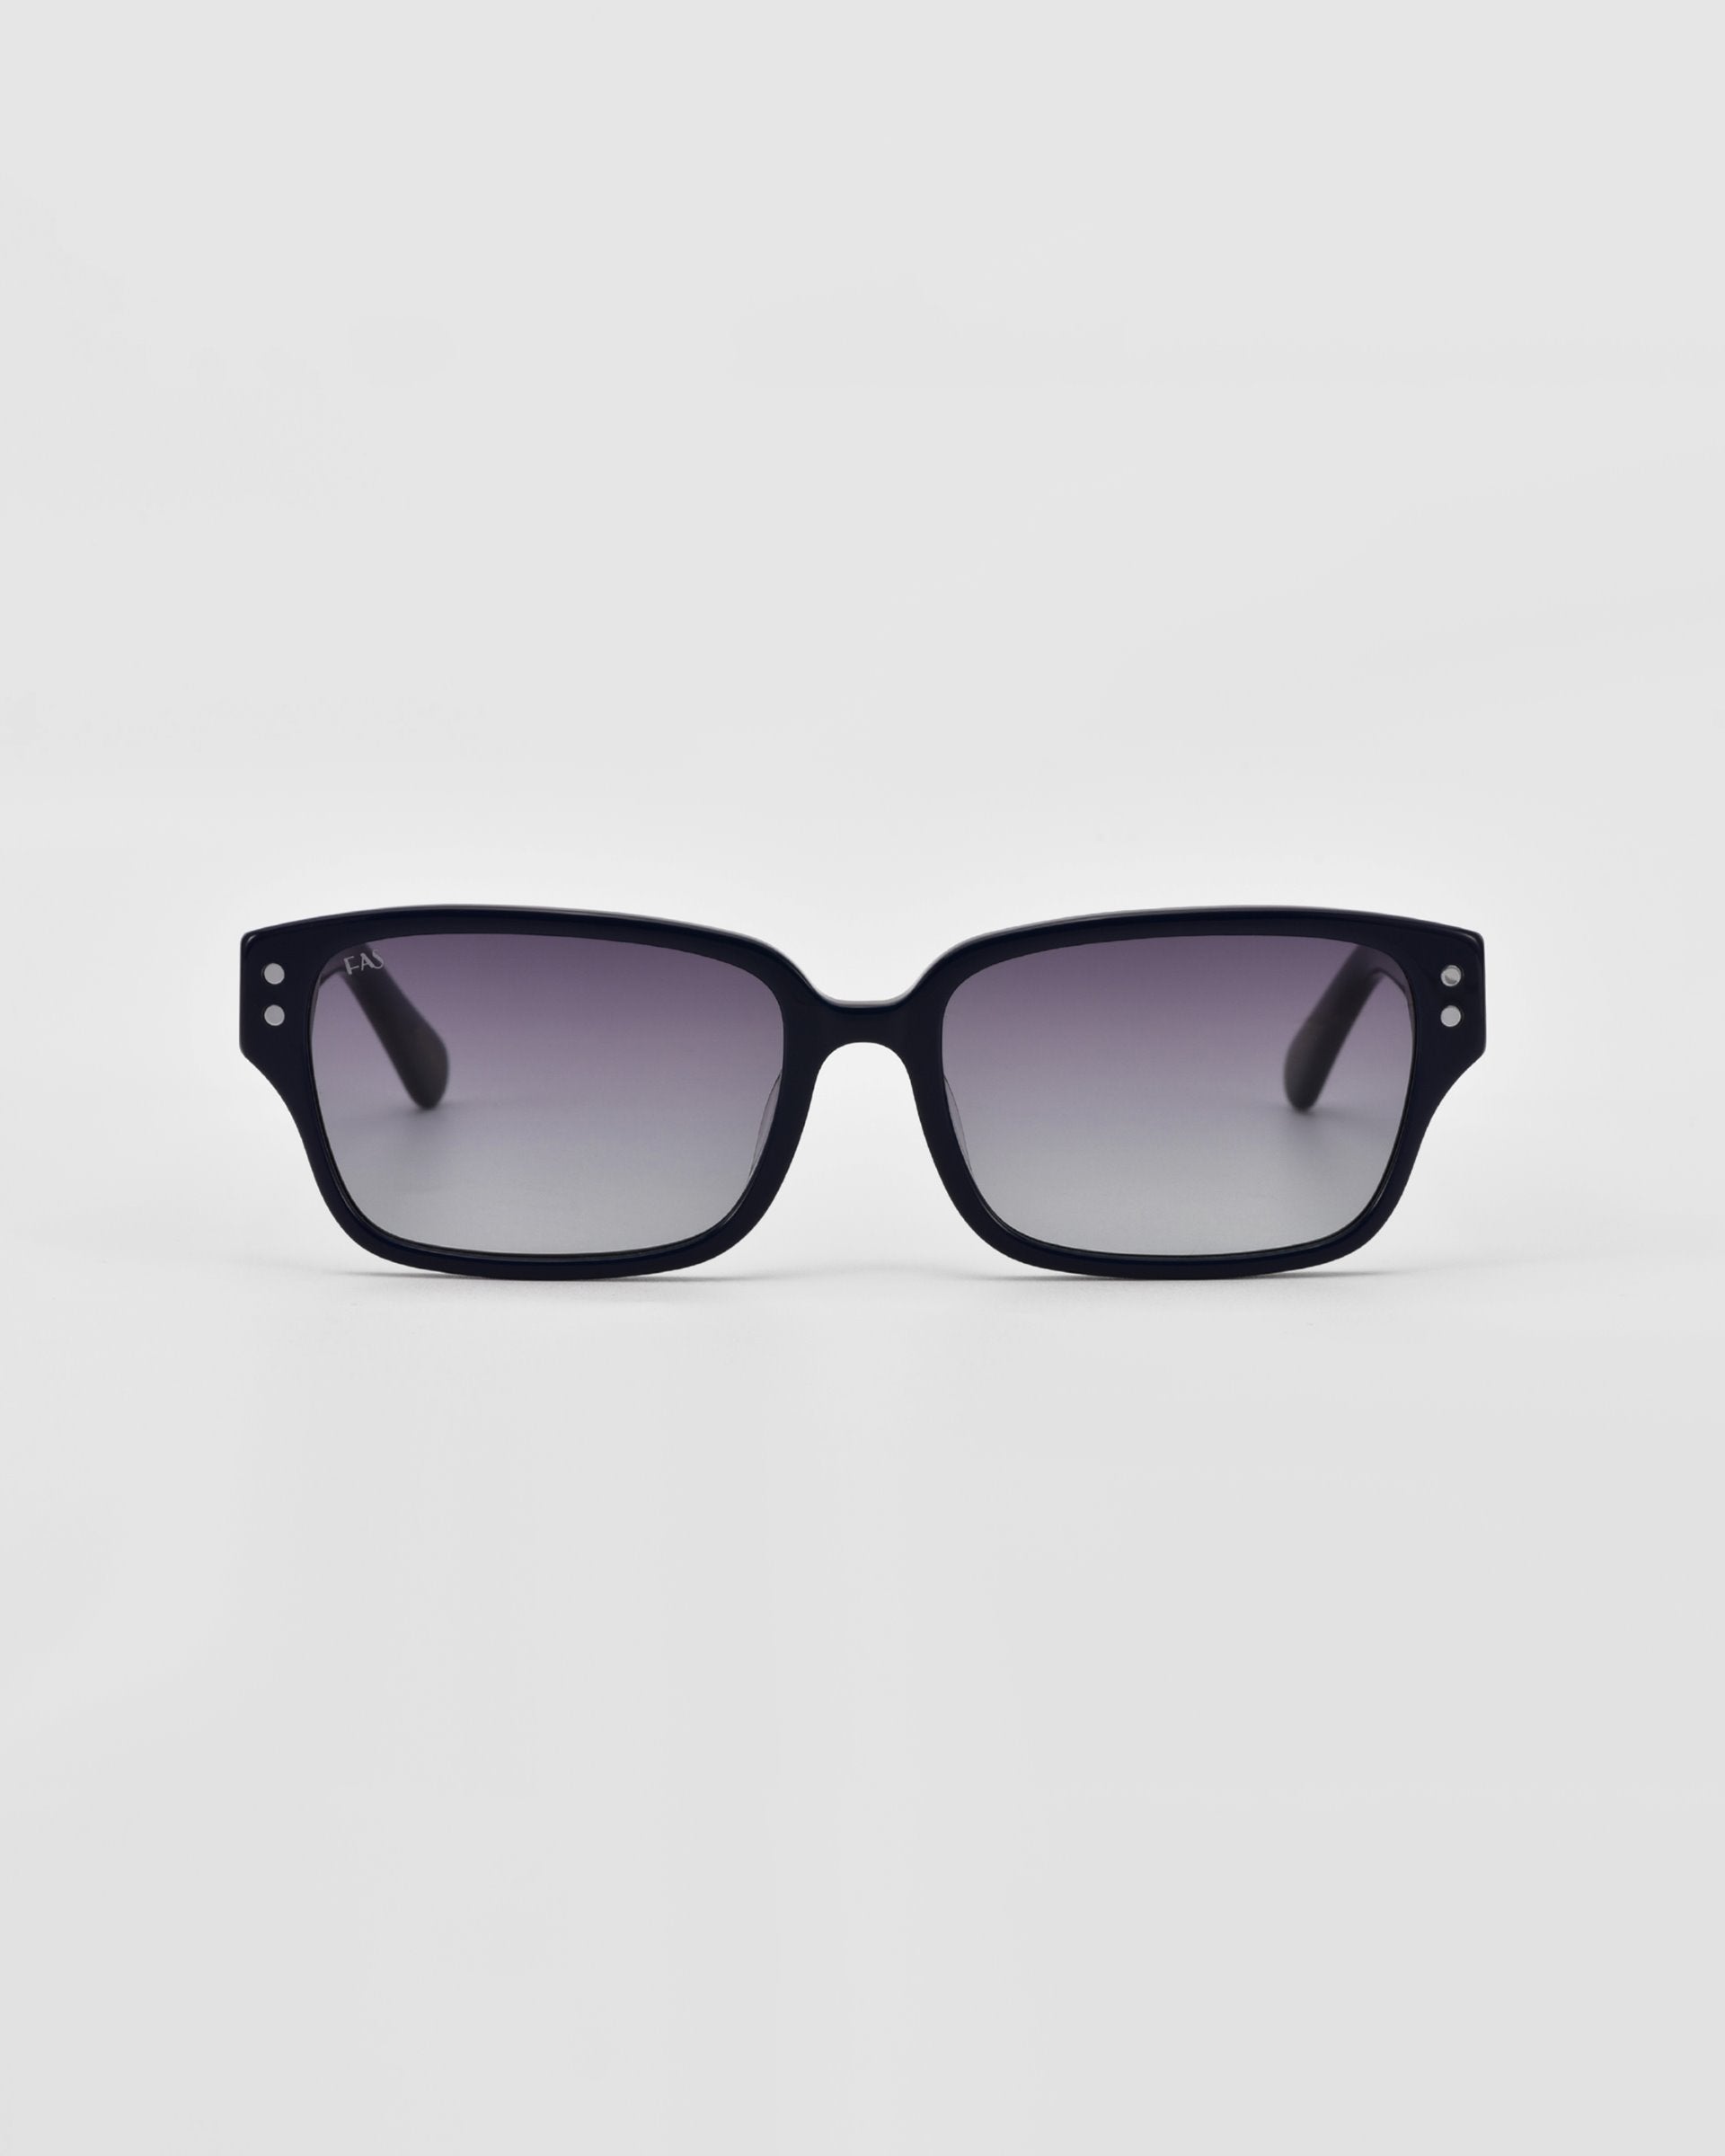 A pair of For Art&#39;s Sake® Zenith sunglasses with black rectangular frames made from handcrafted acetate stand against a plain, light grey background. Enhanced with sleek, slightly curved lines and chunky chain detailing, they exude a modern, stylish look.